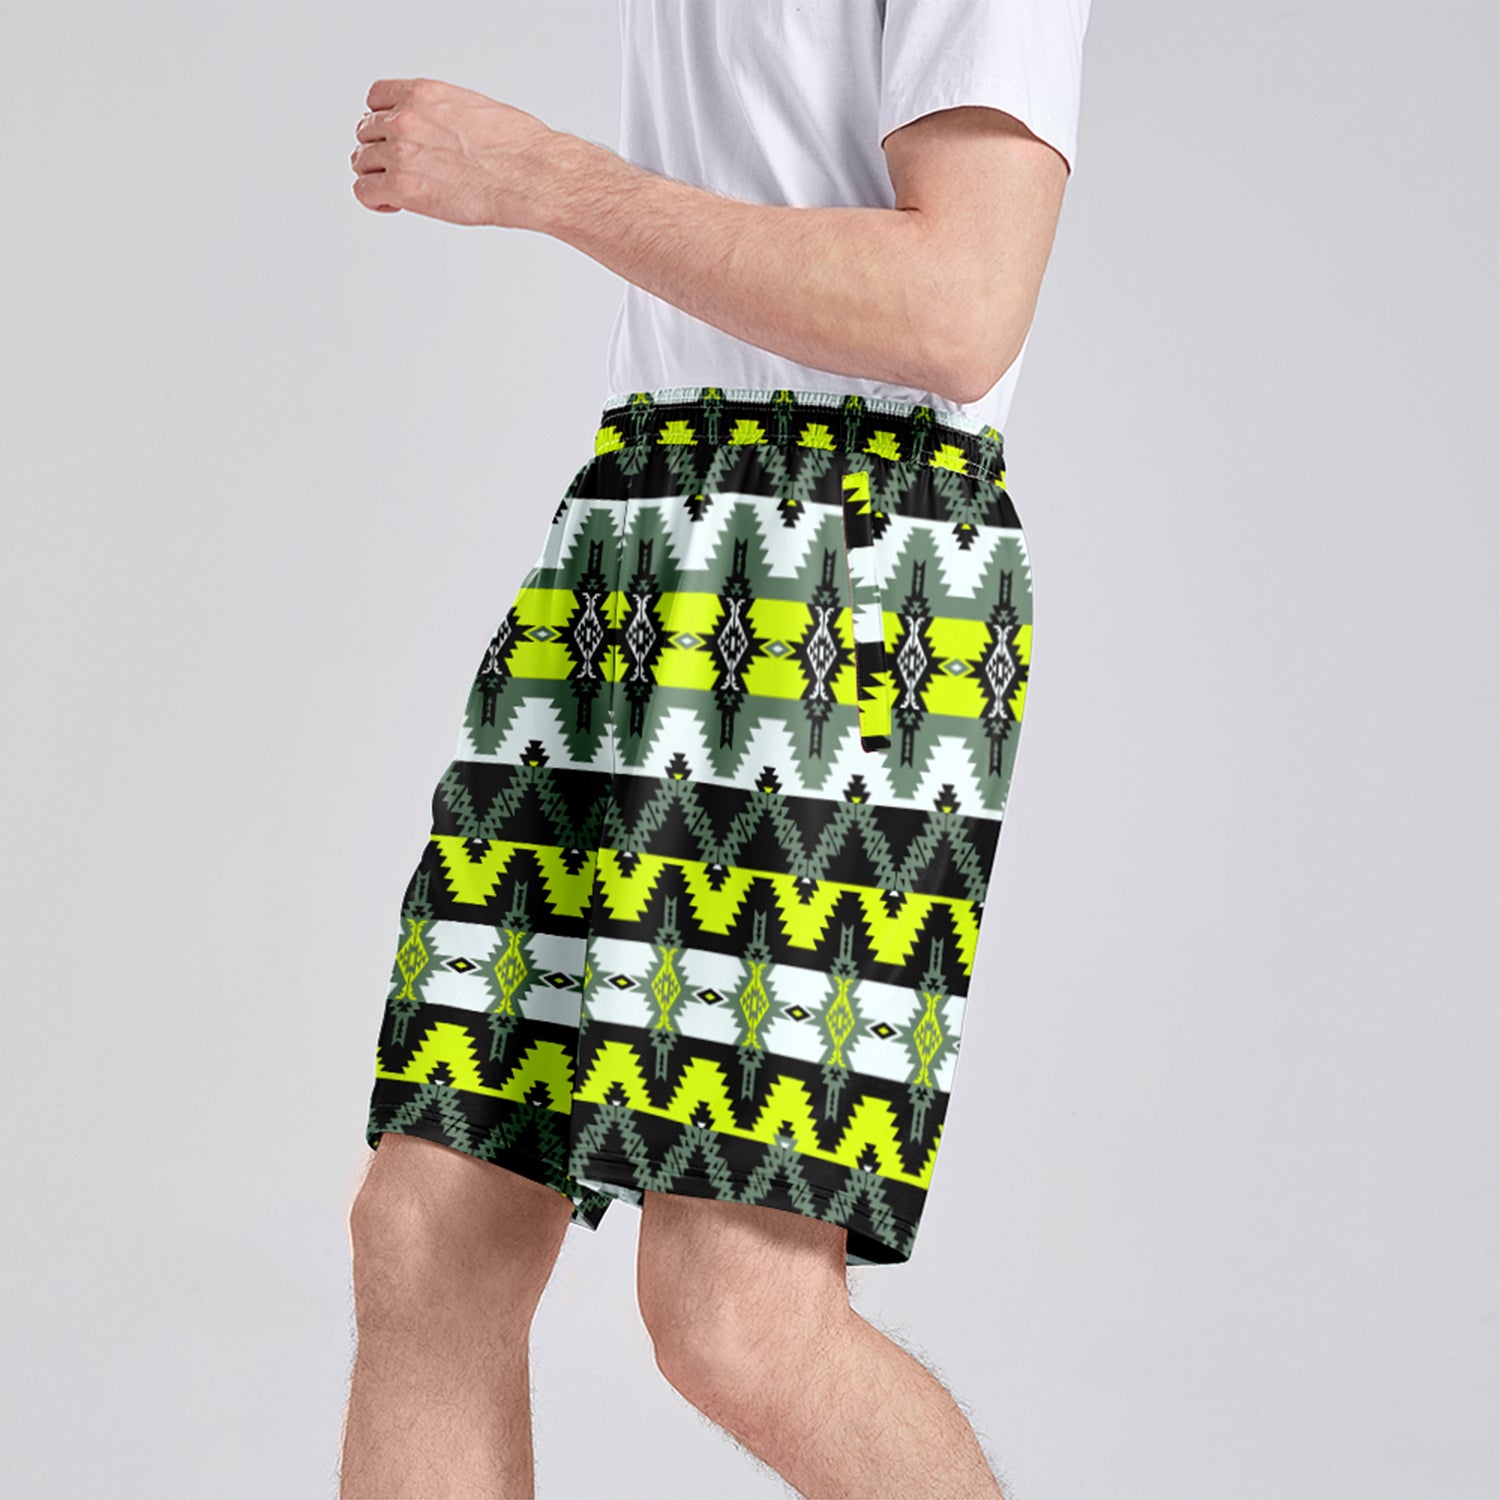 Two Spirit Medicine Athletic Shorts with Pockets